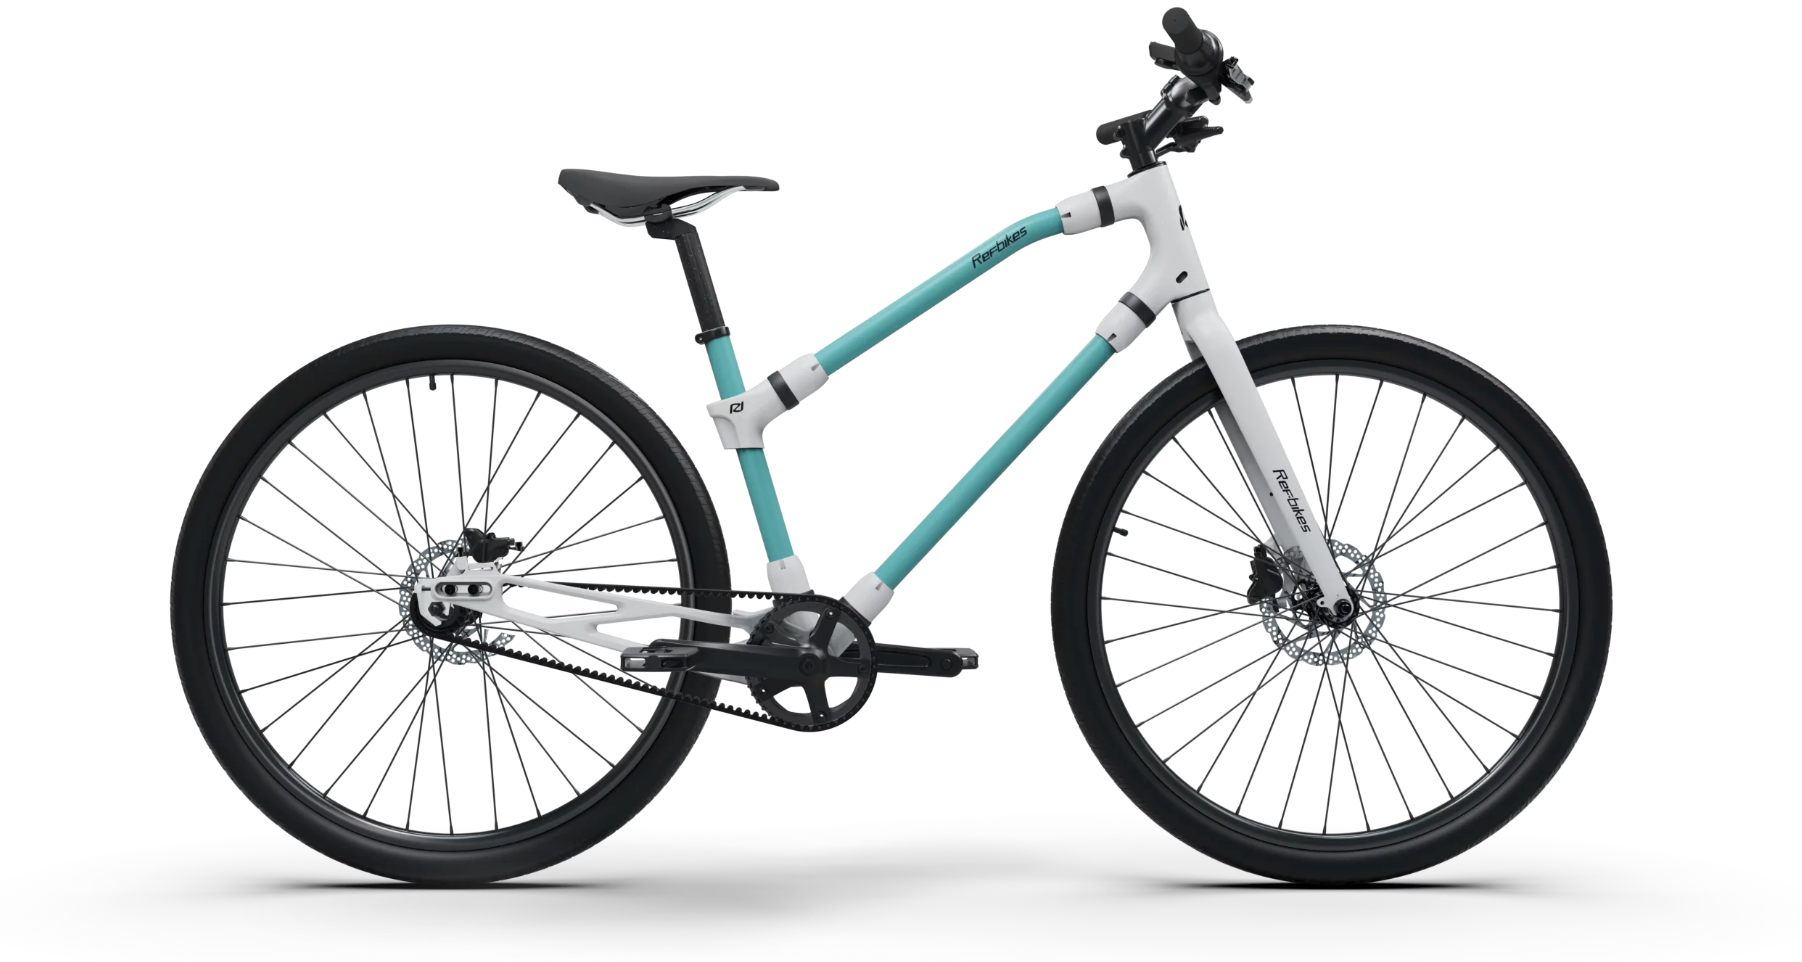 Two-tone aqua and white Ref Essential bike profile, highlighting its lightweight frame for easy travel.